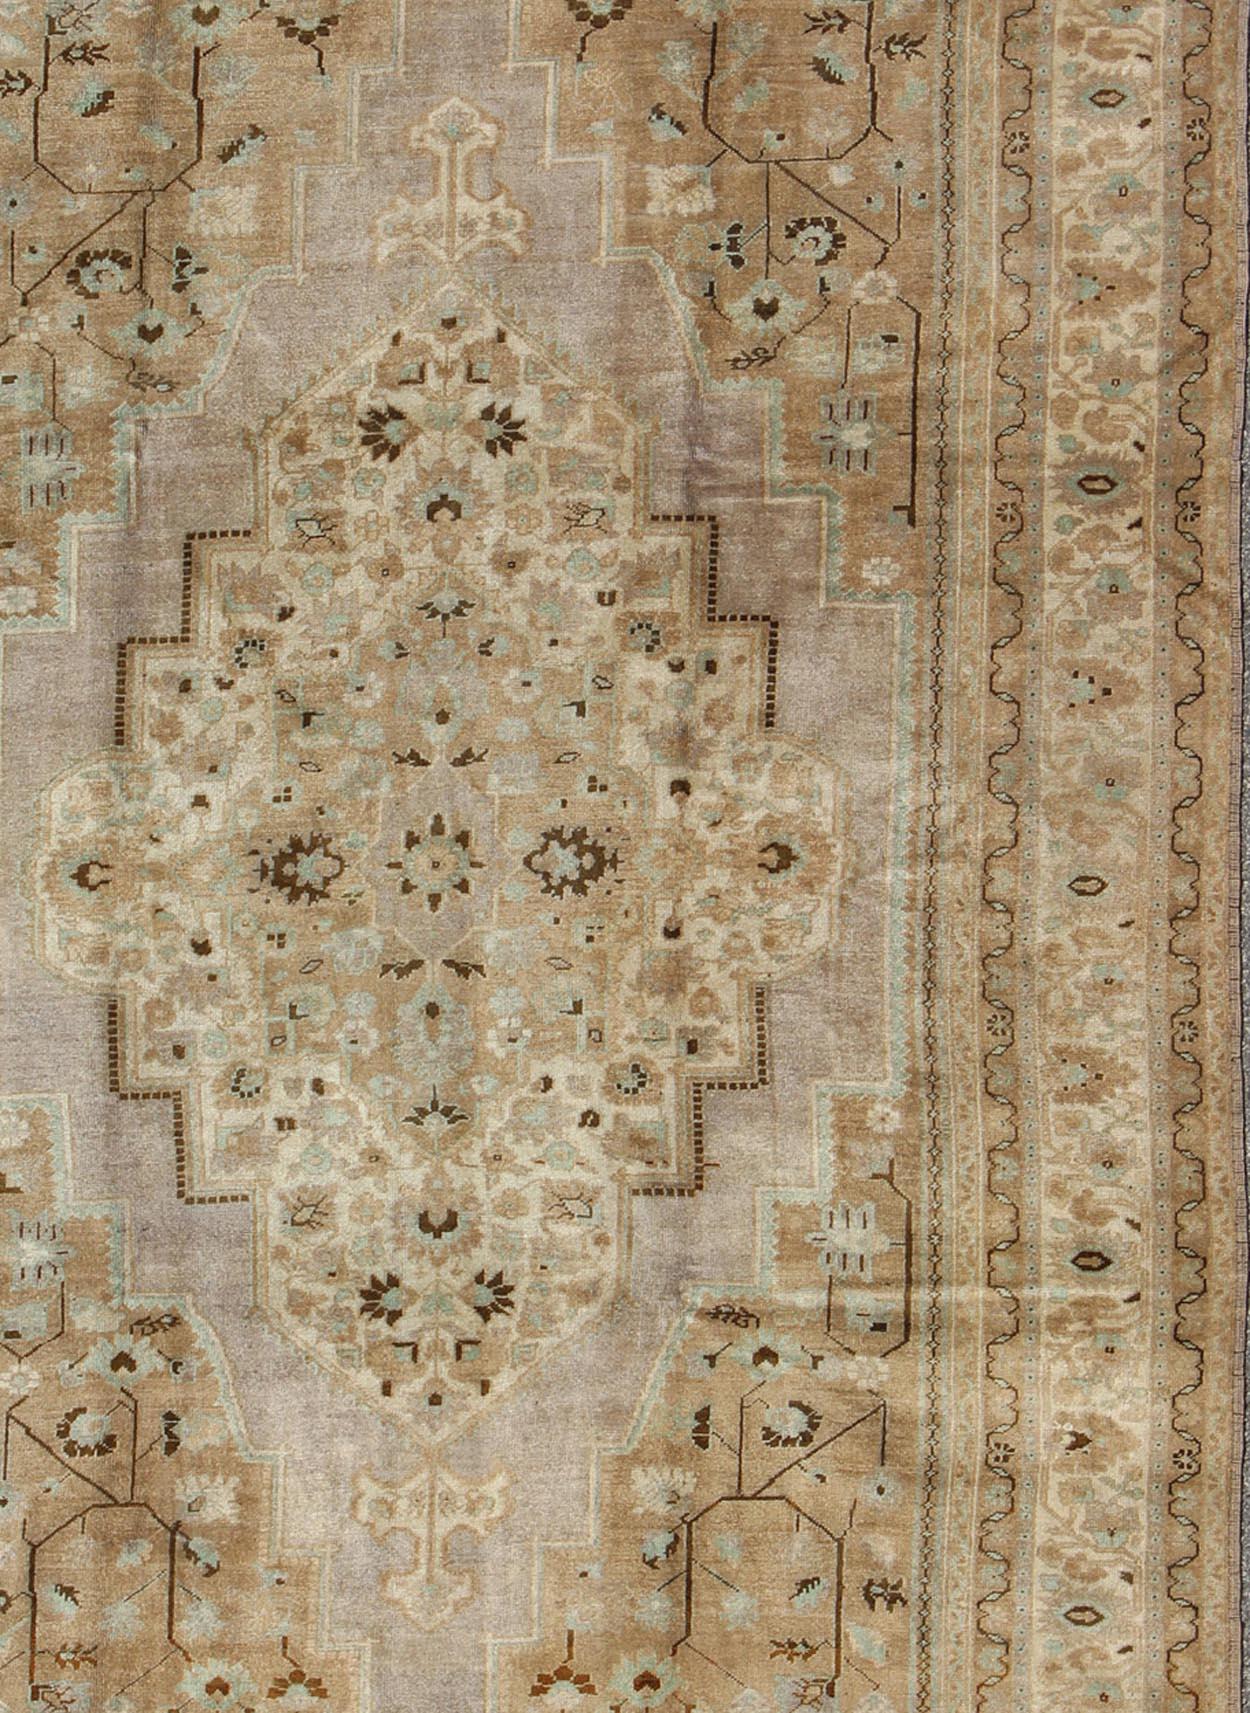 Measures: 7'2 x 11'0

This stunning vintage Turkish Oushak carpet (circa mid-20th century) features a central medallion with floral motifs and subtle sub-geometric elements throughout the medallion, surrounding light lavender field, cornices, and